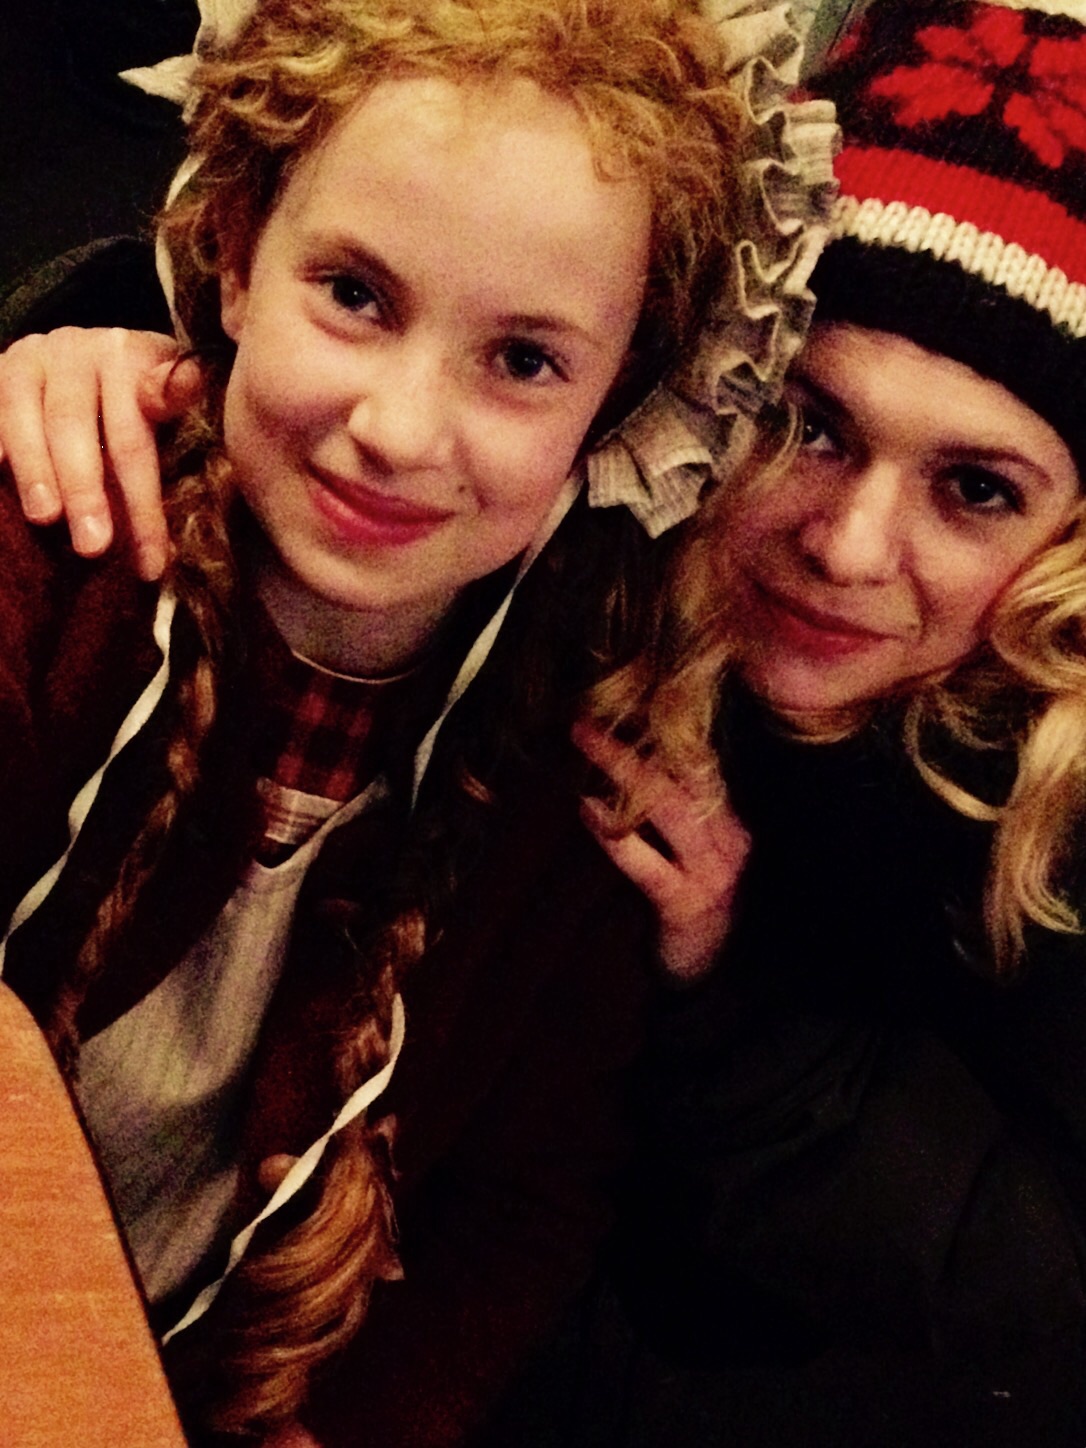 Malia Ashley Kerr as Young Ruth on Hell on Wheels Pictured here with actress Kasha Kropinski who played Ruth on the show.